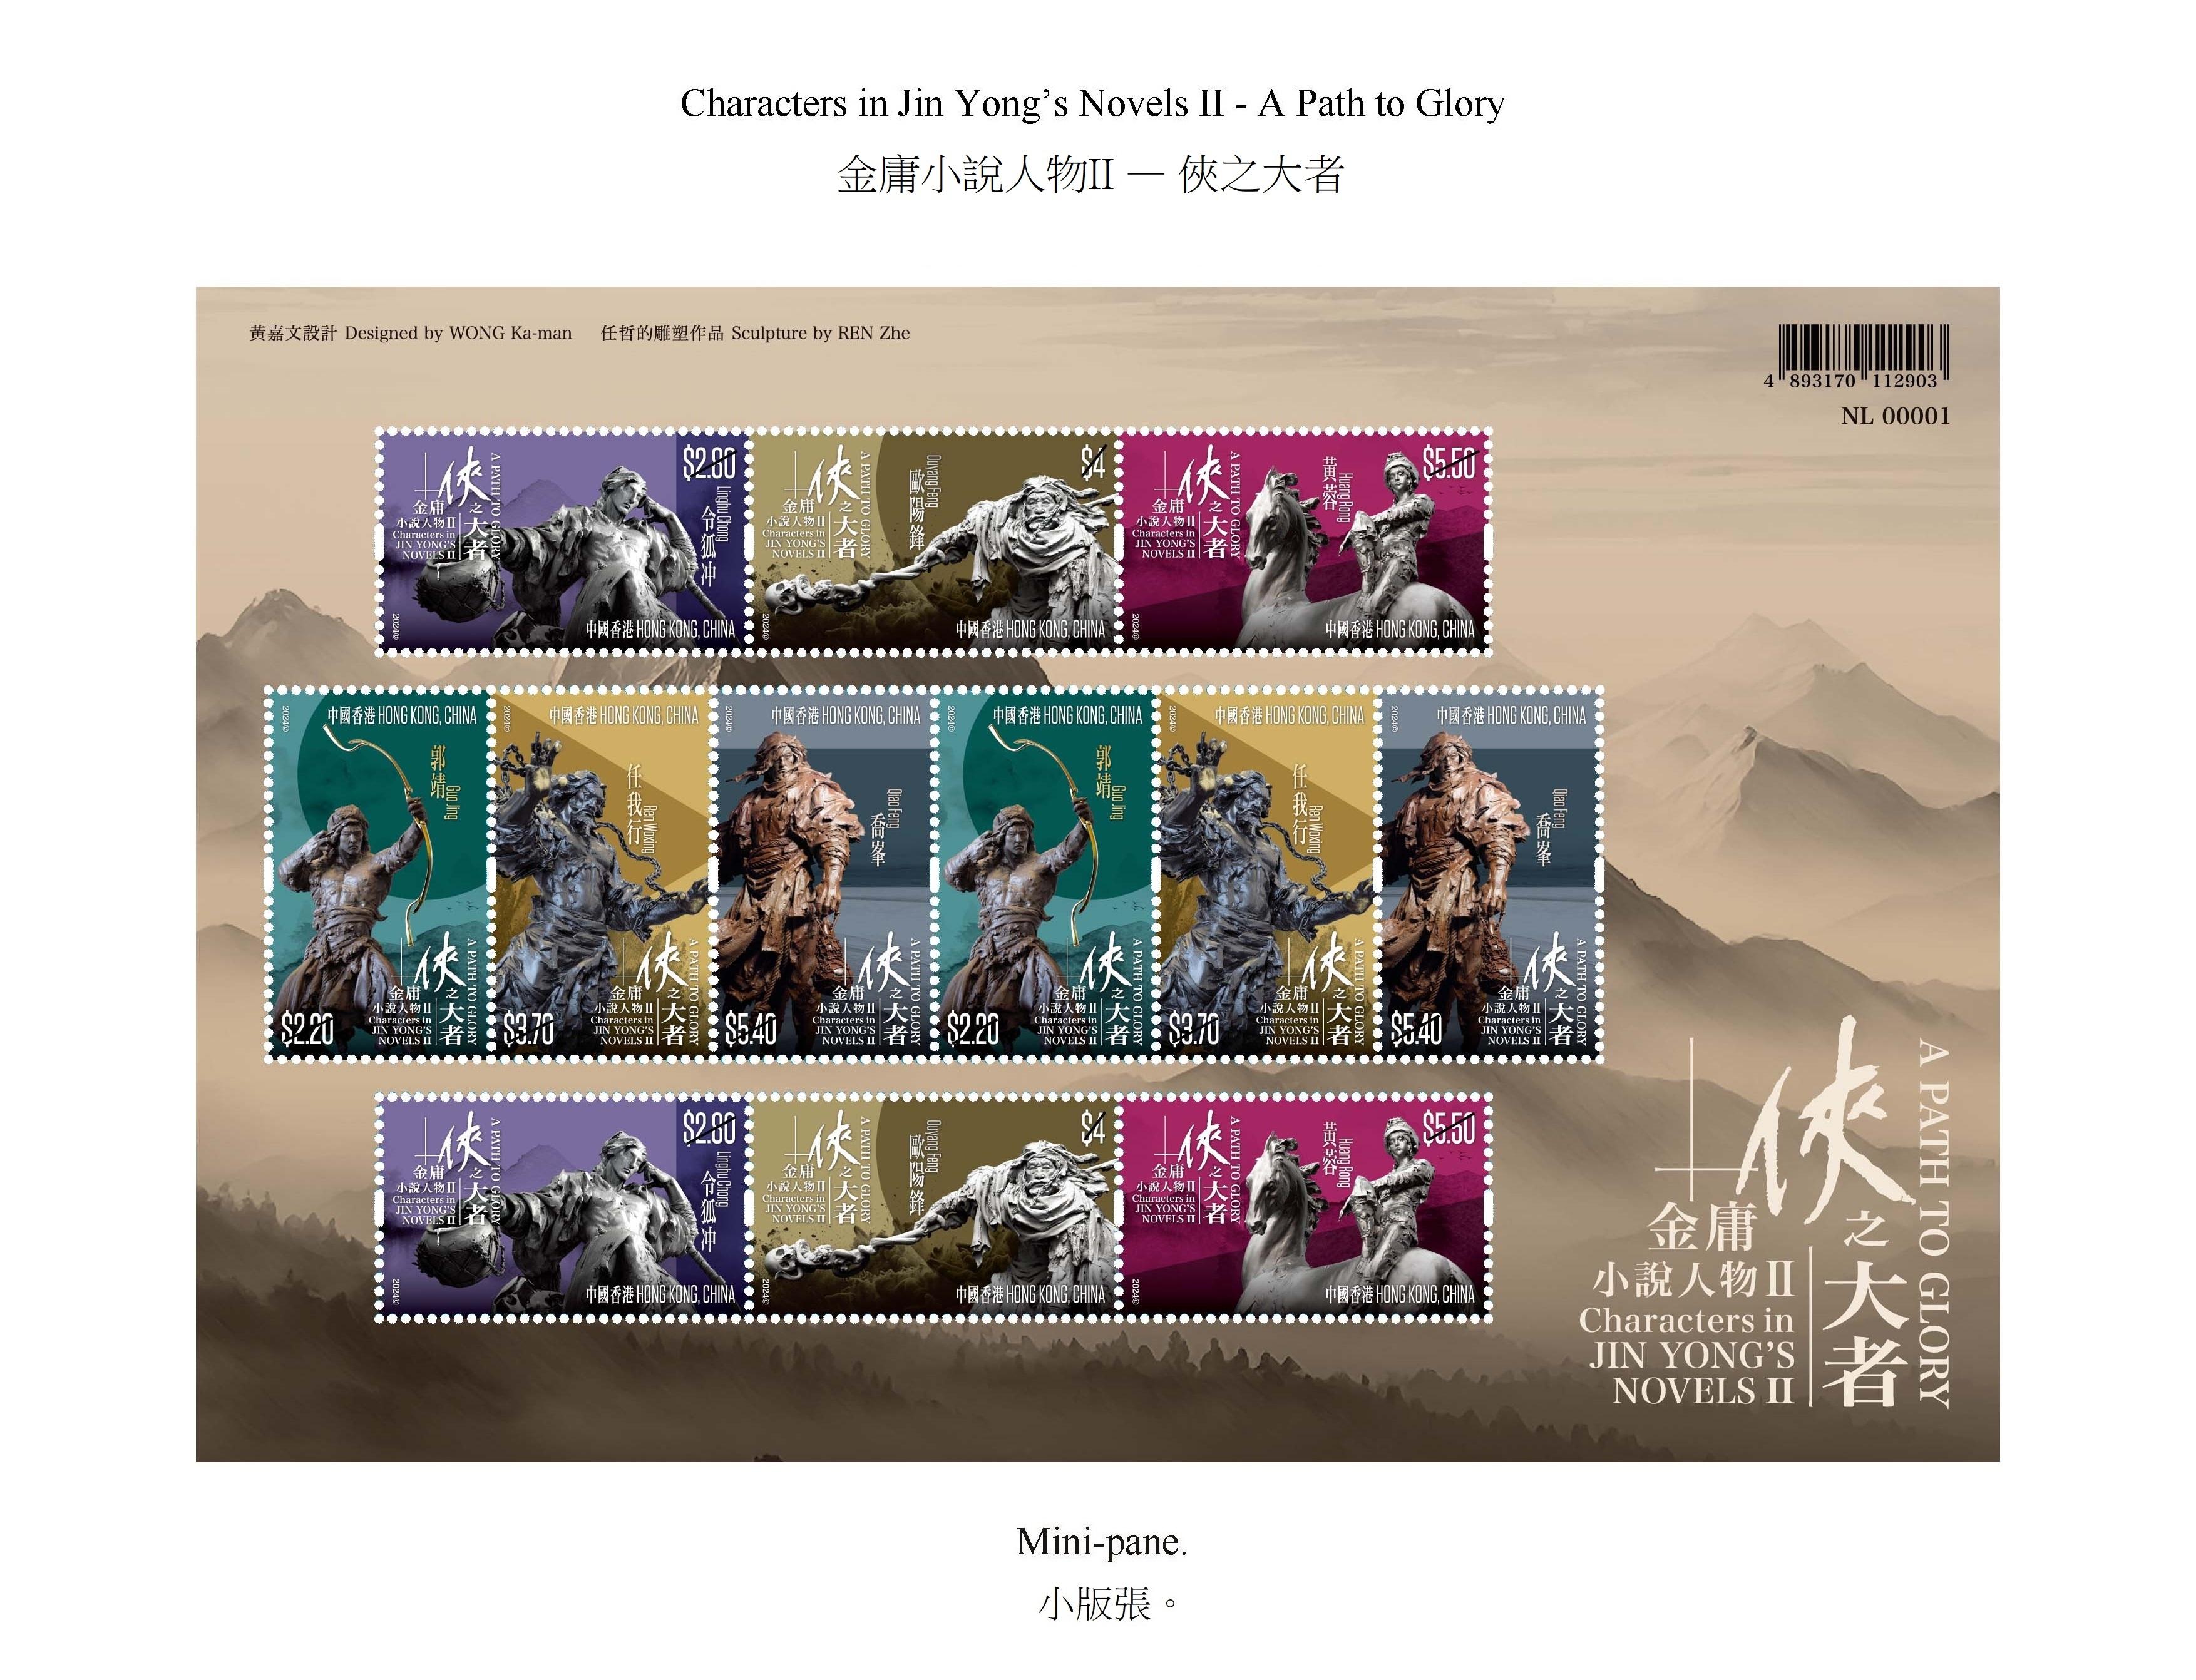 Hongkong Post will launch a special stamp issue and associated philatelic products on the theme of "Characters in Jin Yong's Novels II - A Path to Glory" on March 14 (Thursday). Photo shows the mini-pane.

